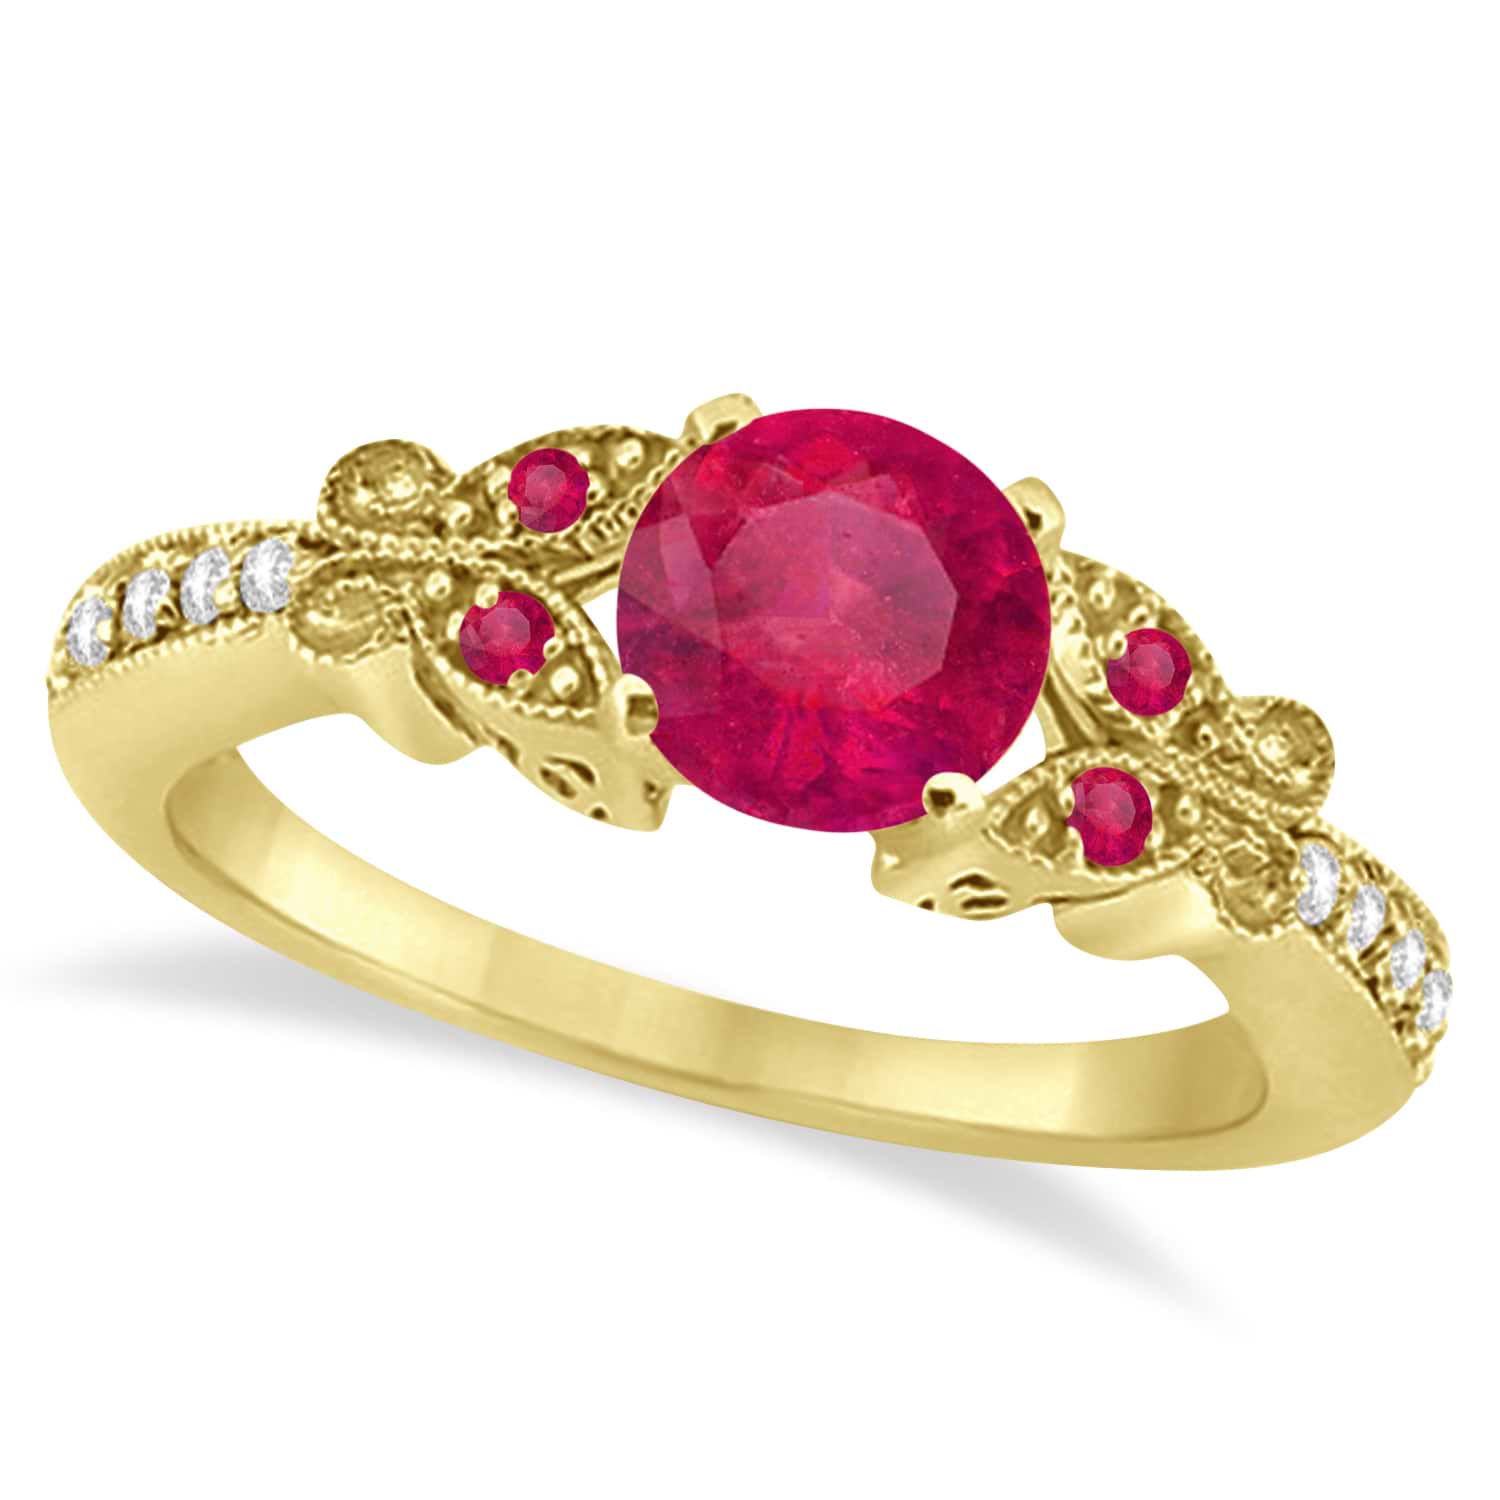 Butterfly Genuine Ruby & Diamond Engagement Ring 14K Yellow Gold 0.86ct